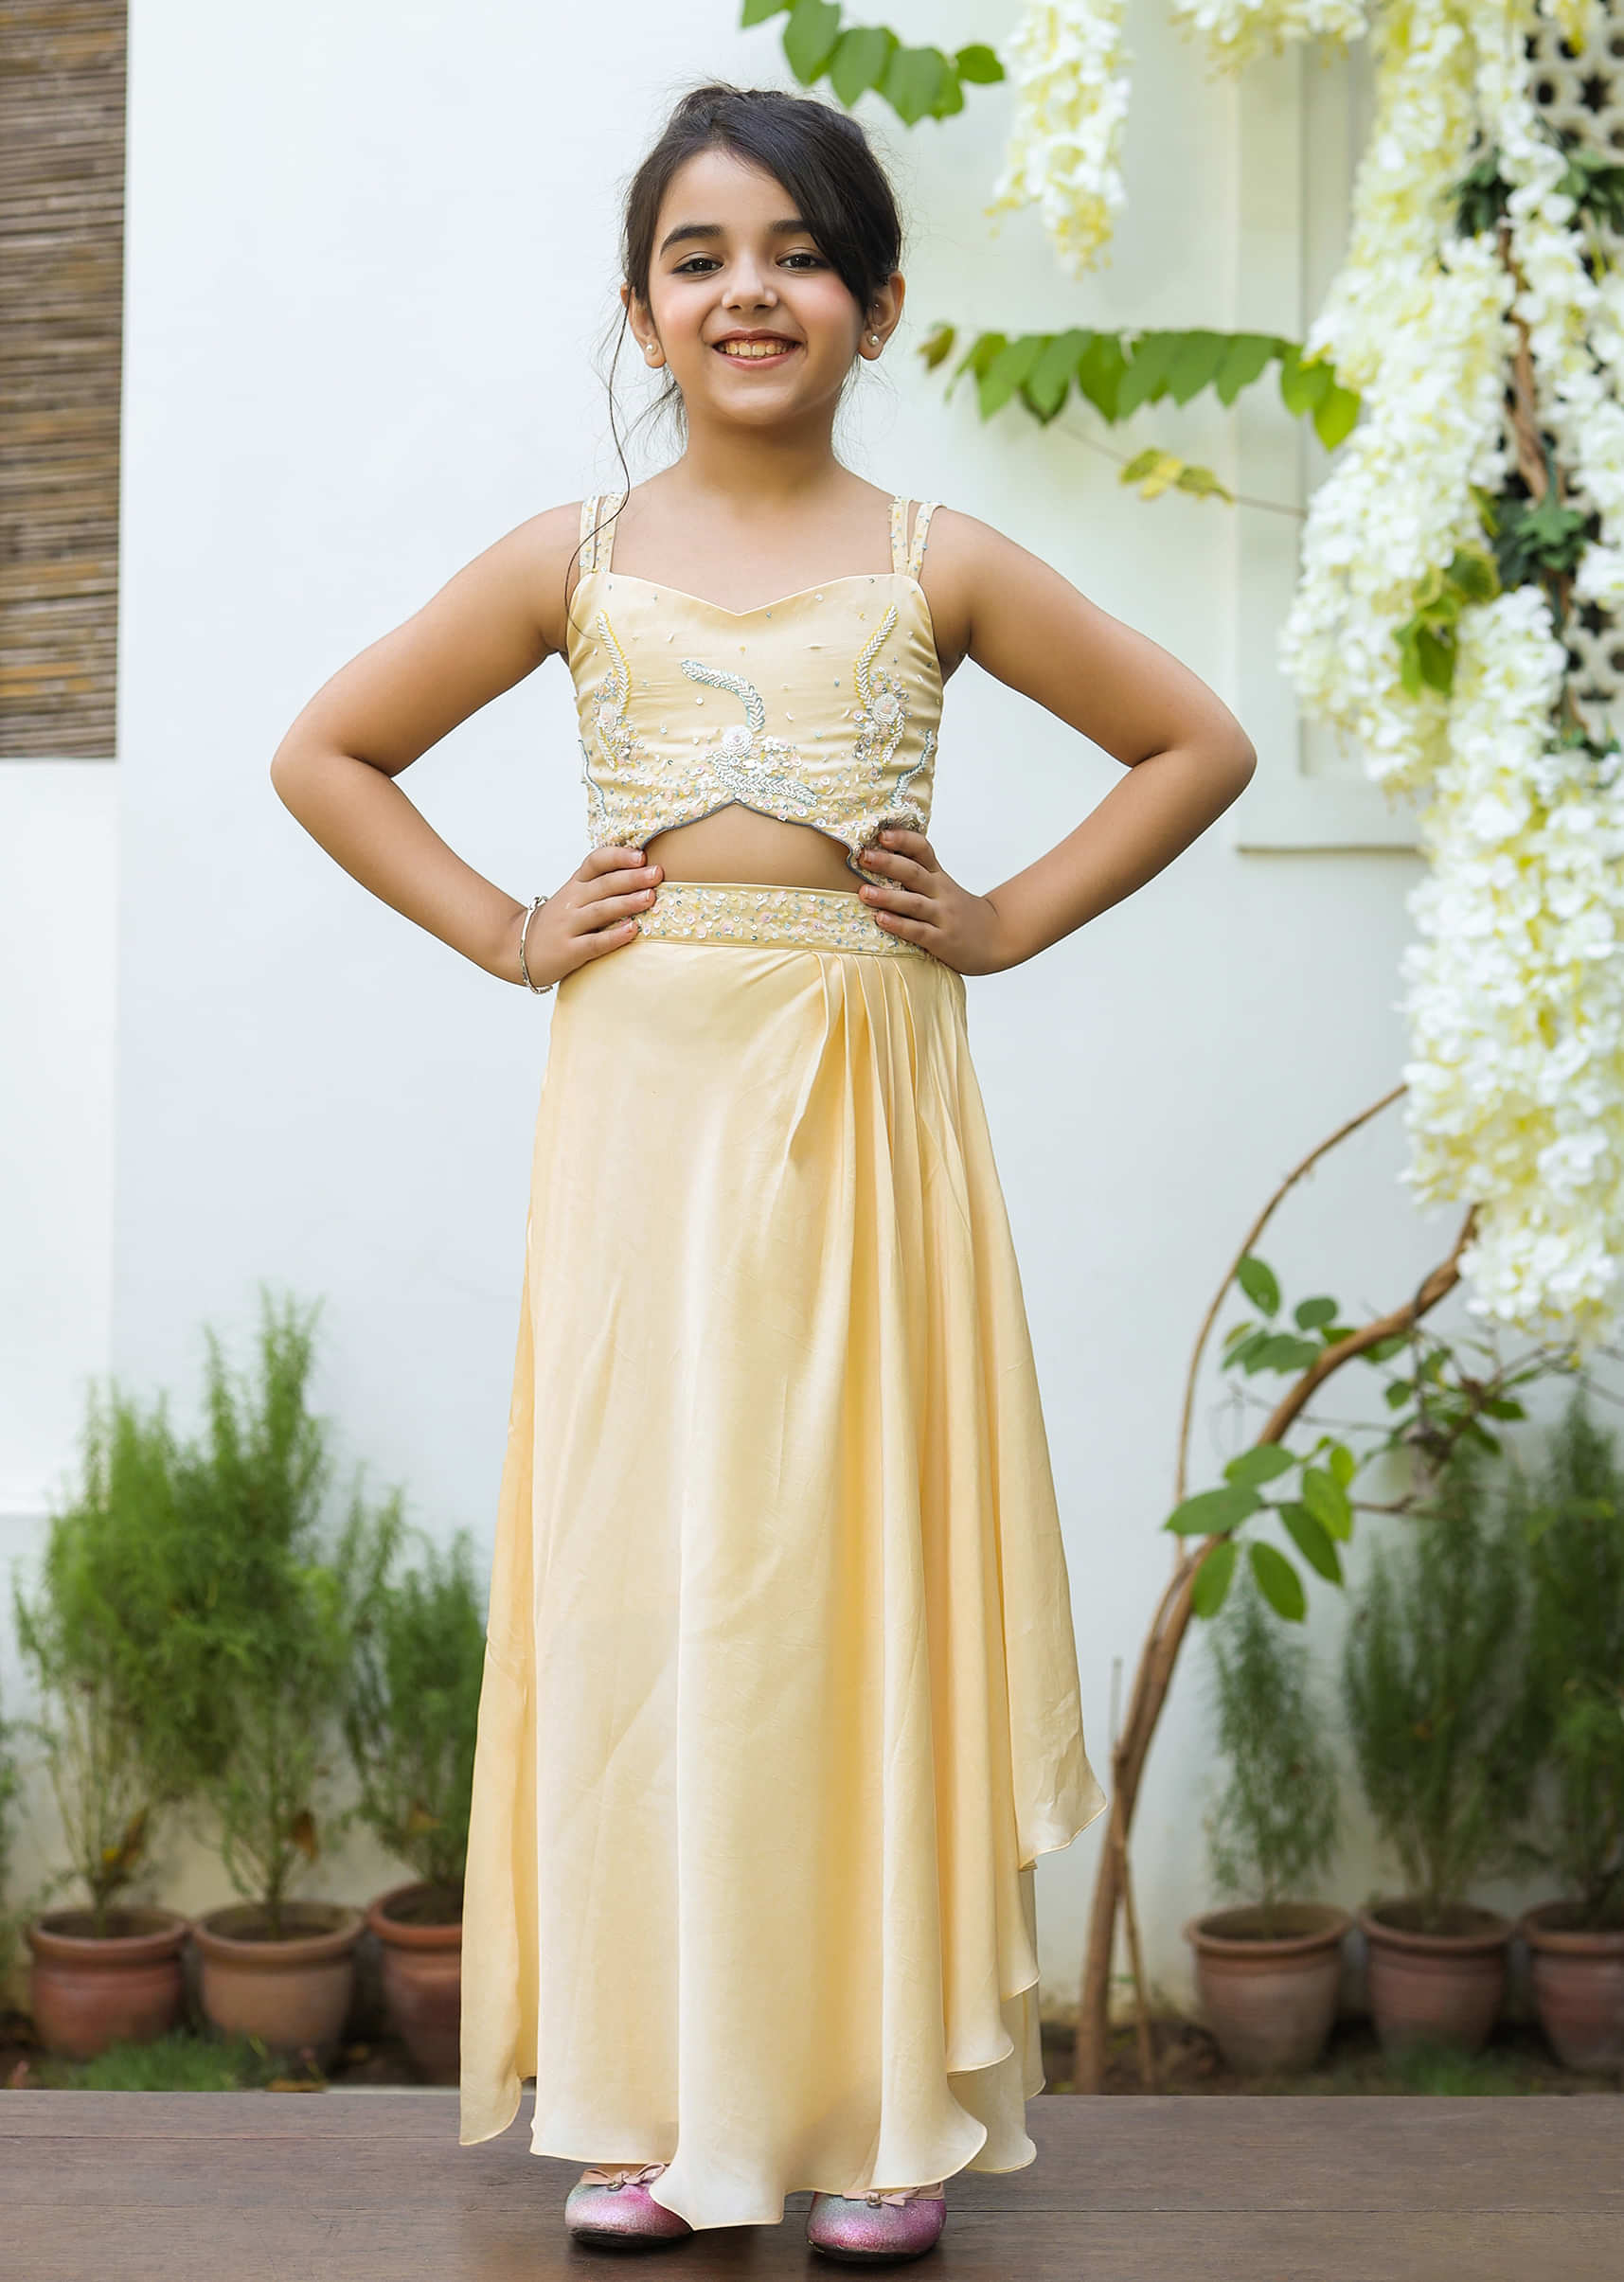 Kalki Girls Yellow Draped Dress With Delicate Butterfly Wing Neckline And Cut Out Detailing